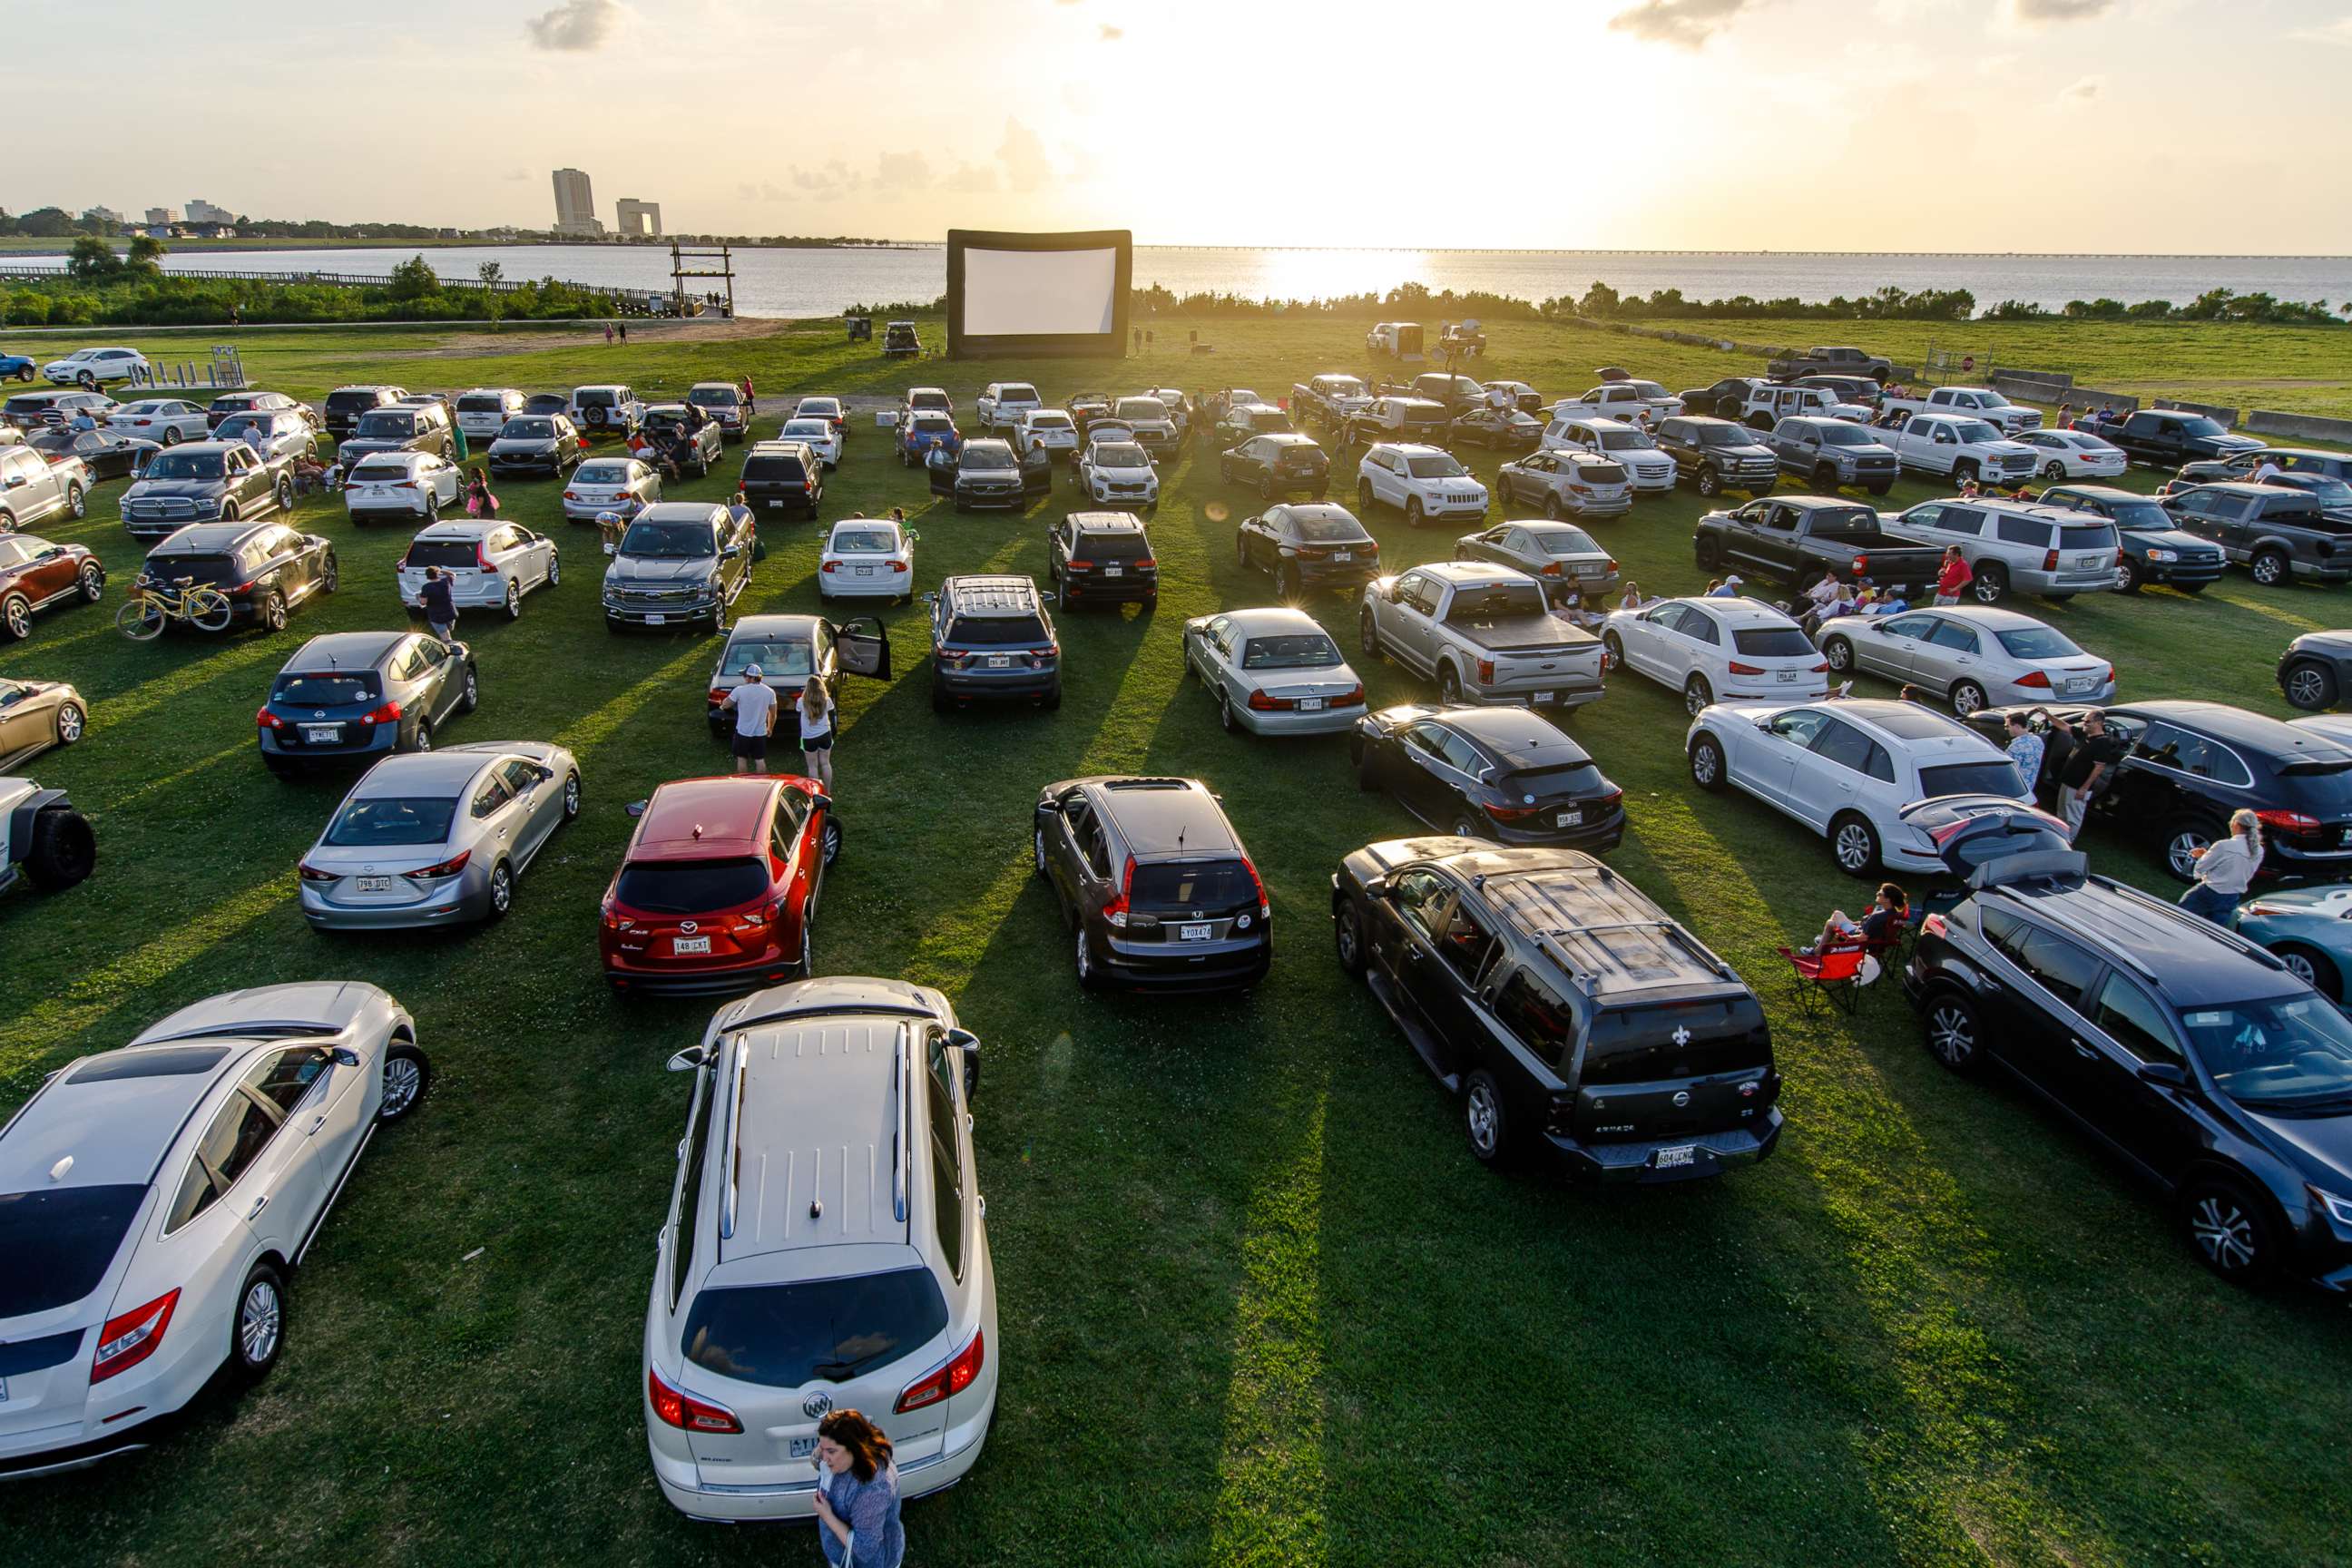 PHOTO: Attendees arrive to watch the movie "Grease" at a pop-up drive-in theatre at Bucktown Marina Park on May 22, 2020 in Metairie, La.